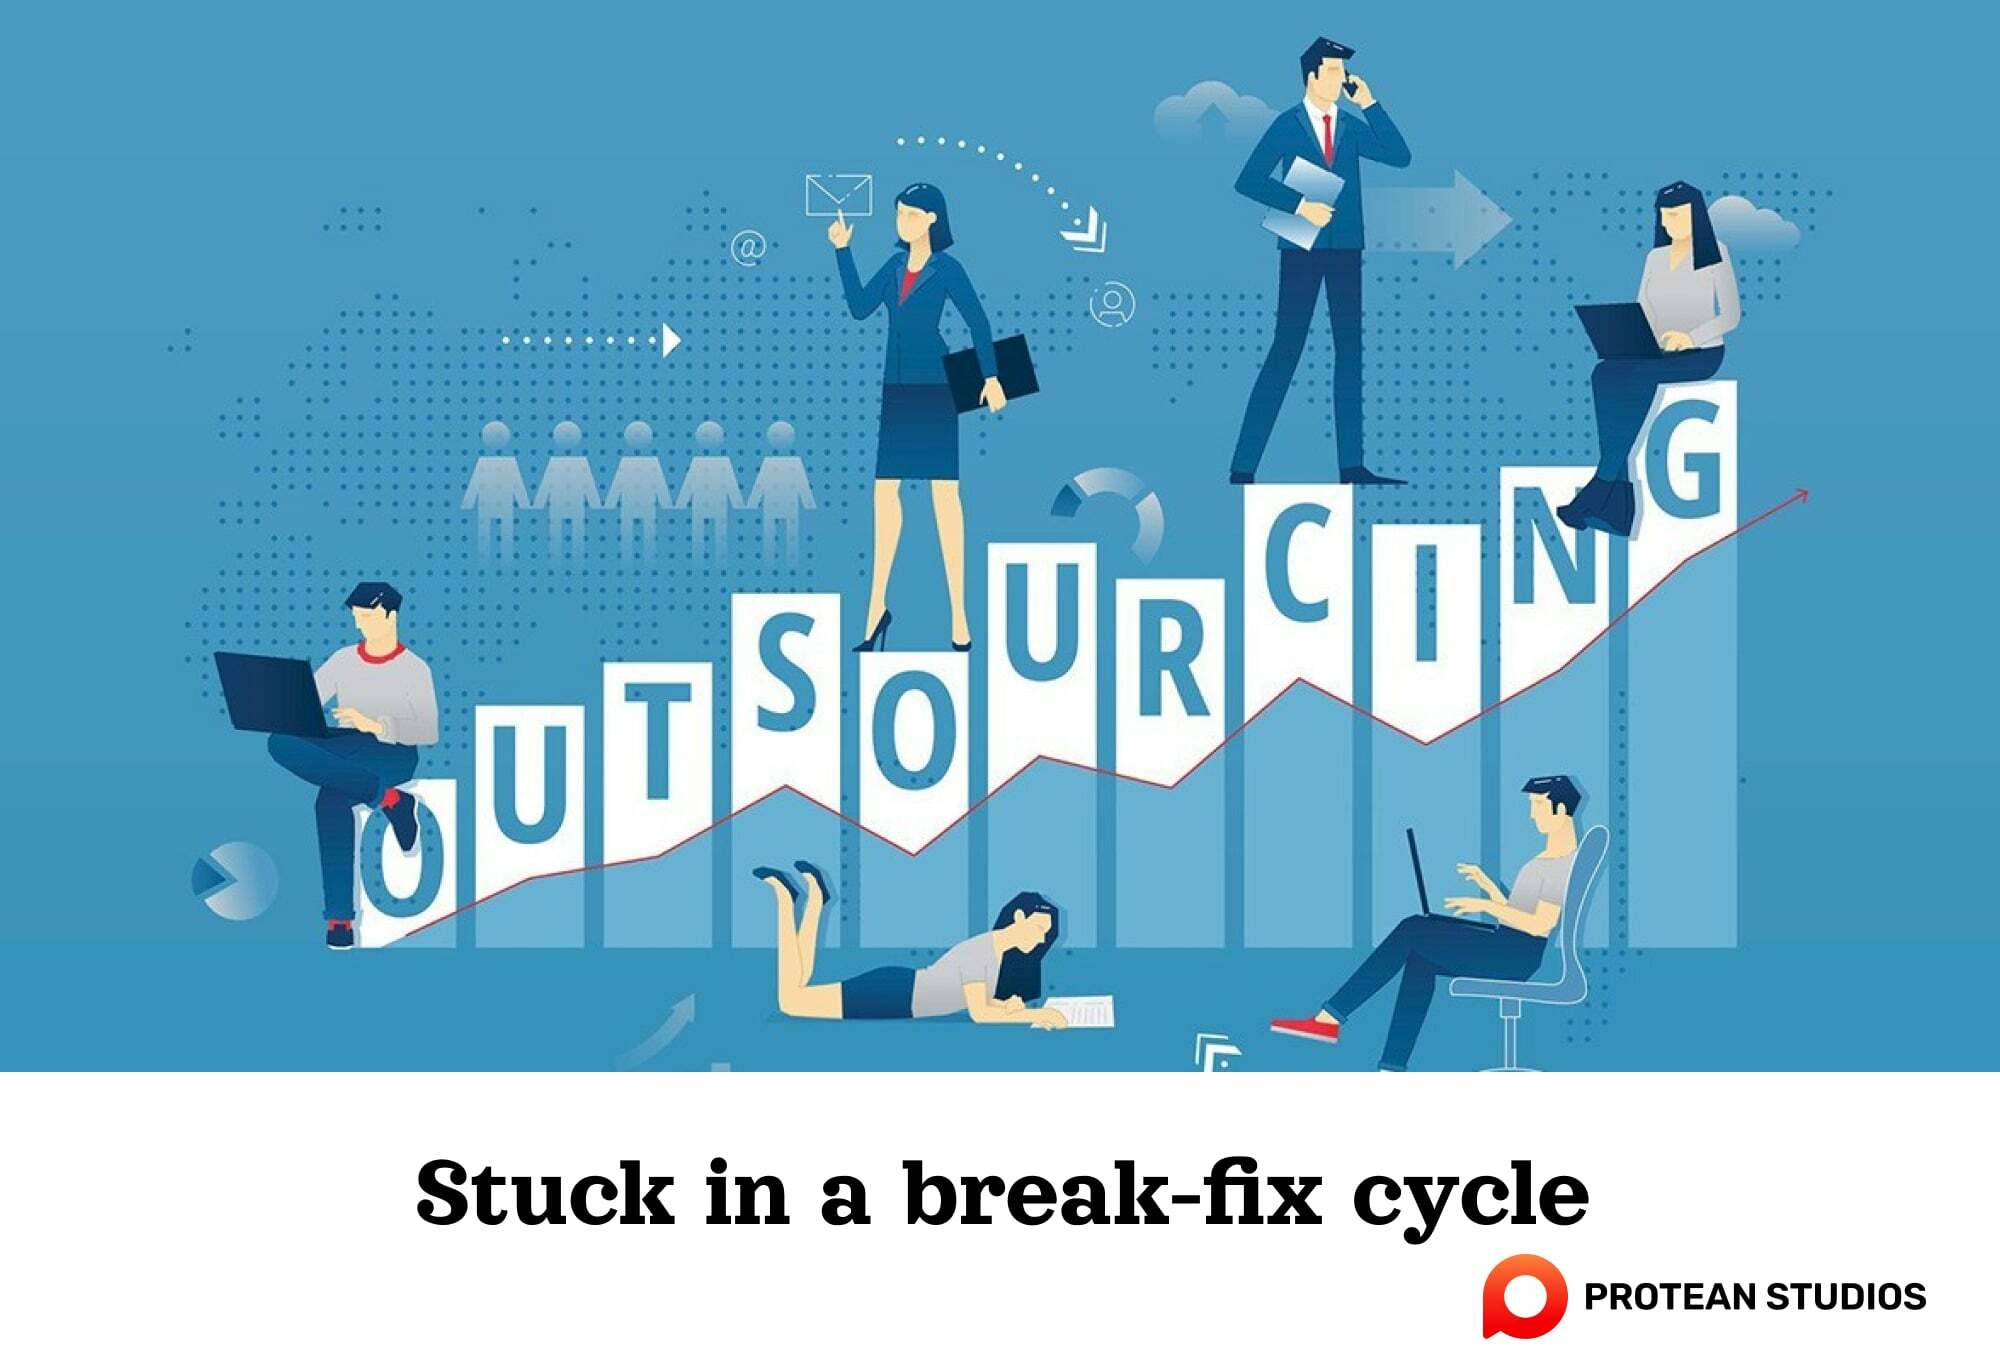 Stuck in a break-fix cycle is a sign to choose IT outsourcing